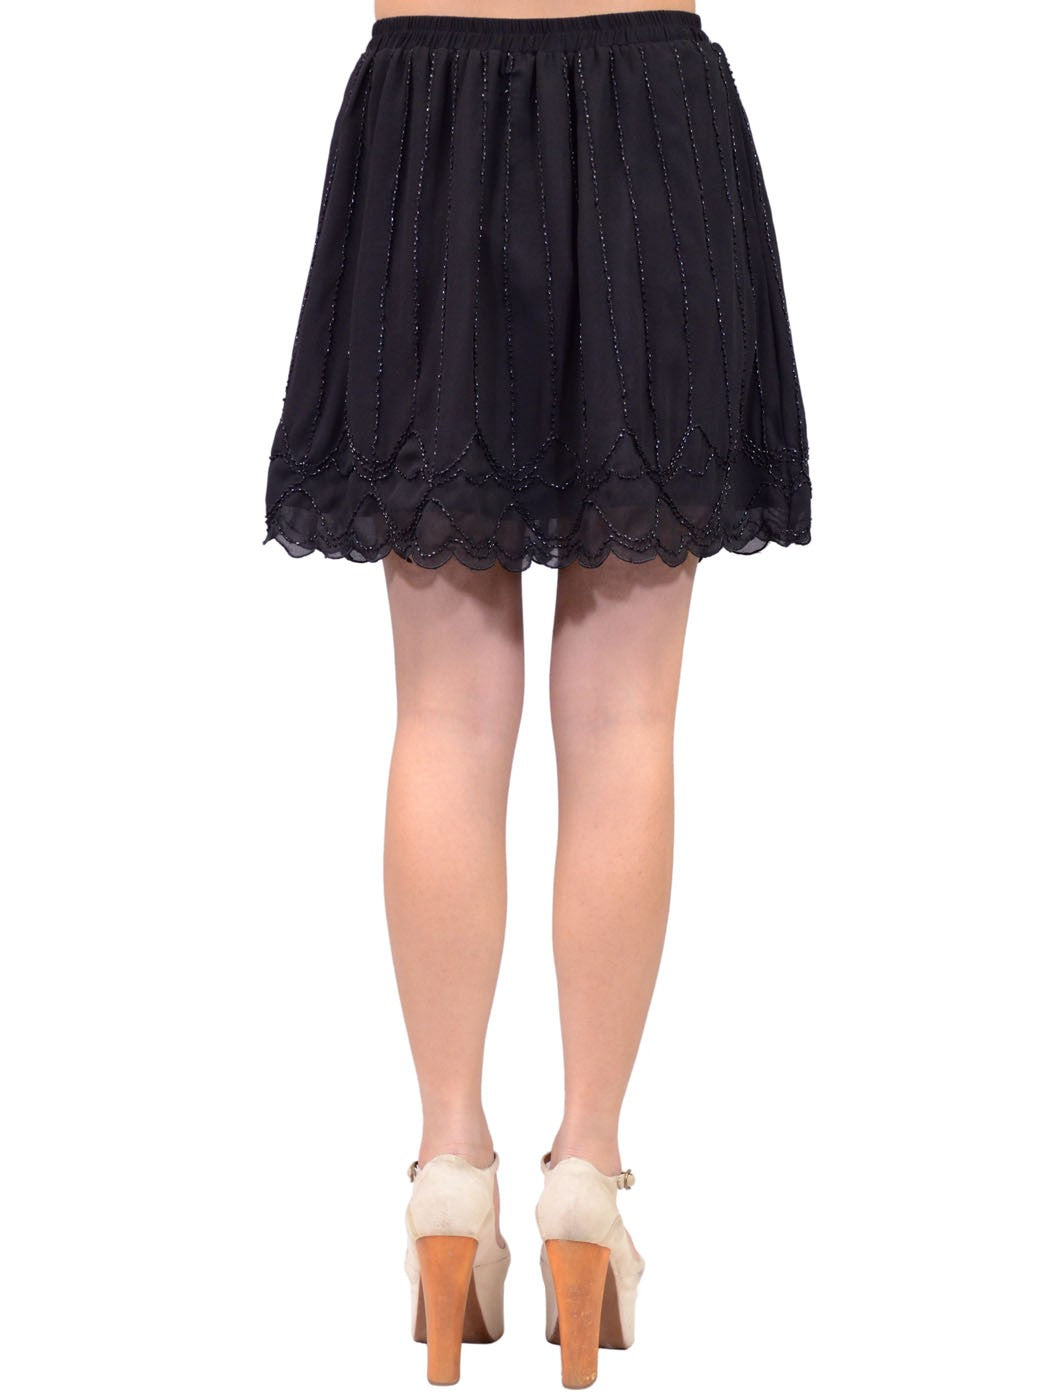 Gentle Fawn Cute Girly Holiday Scalloped Chiffon Skirt With Beaded Design - ALILANG.COM